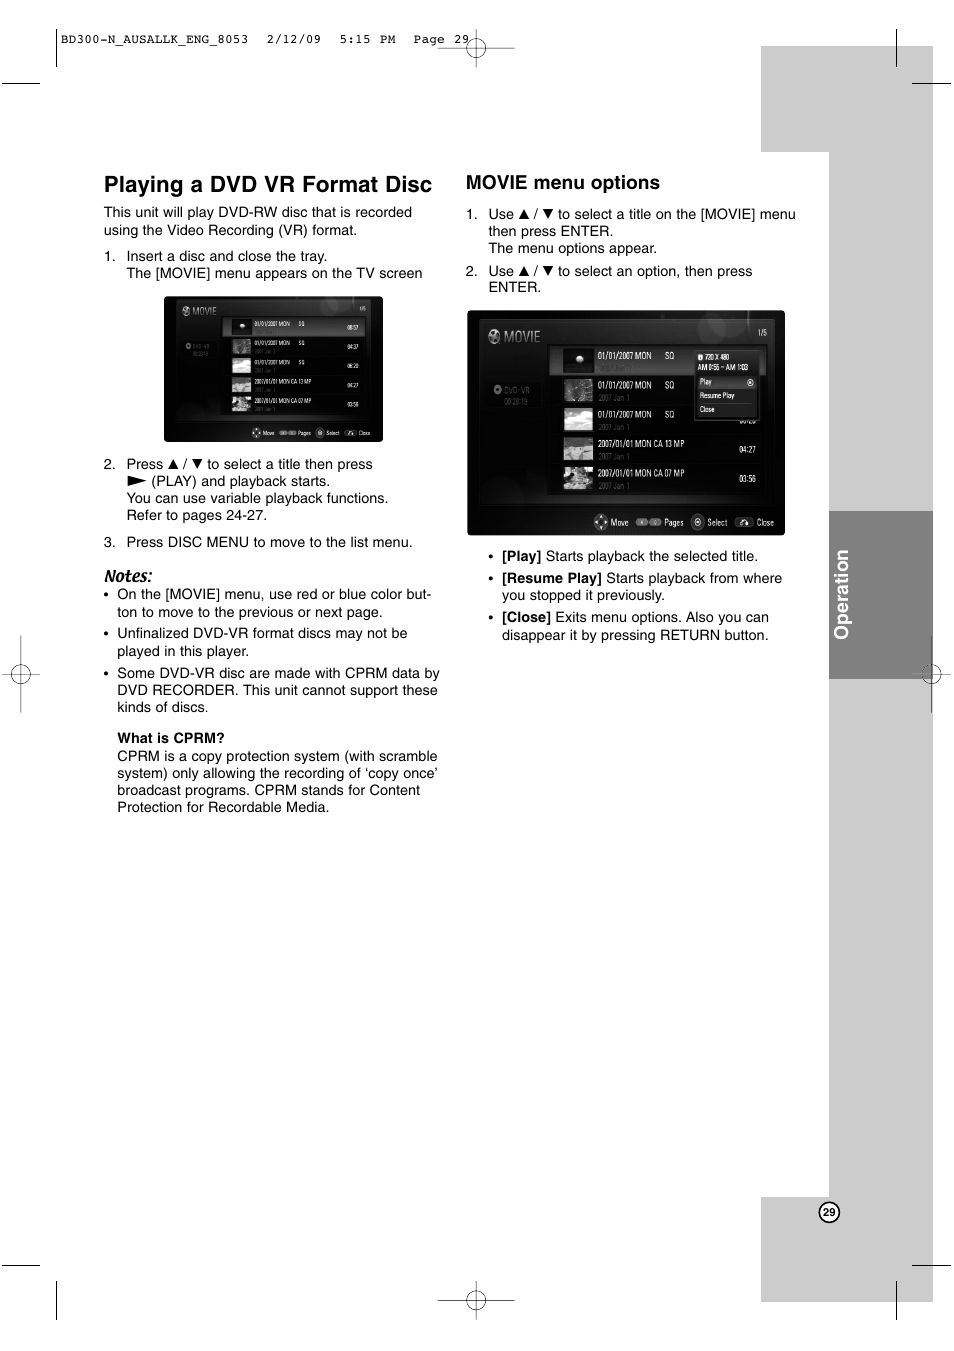 Playing a dvd vr format disc, Operation, Movie menu options | LG BD300 User Manual | Page 29 / 48